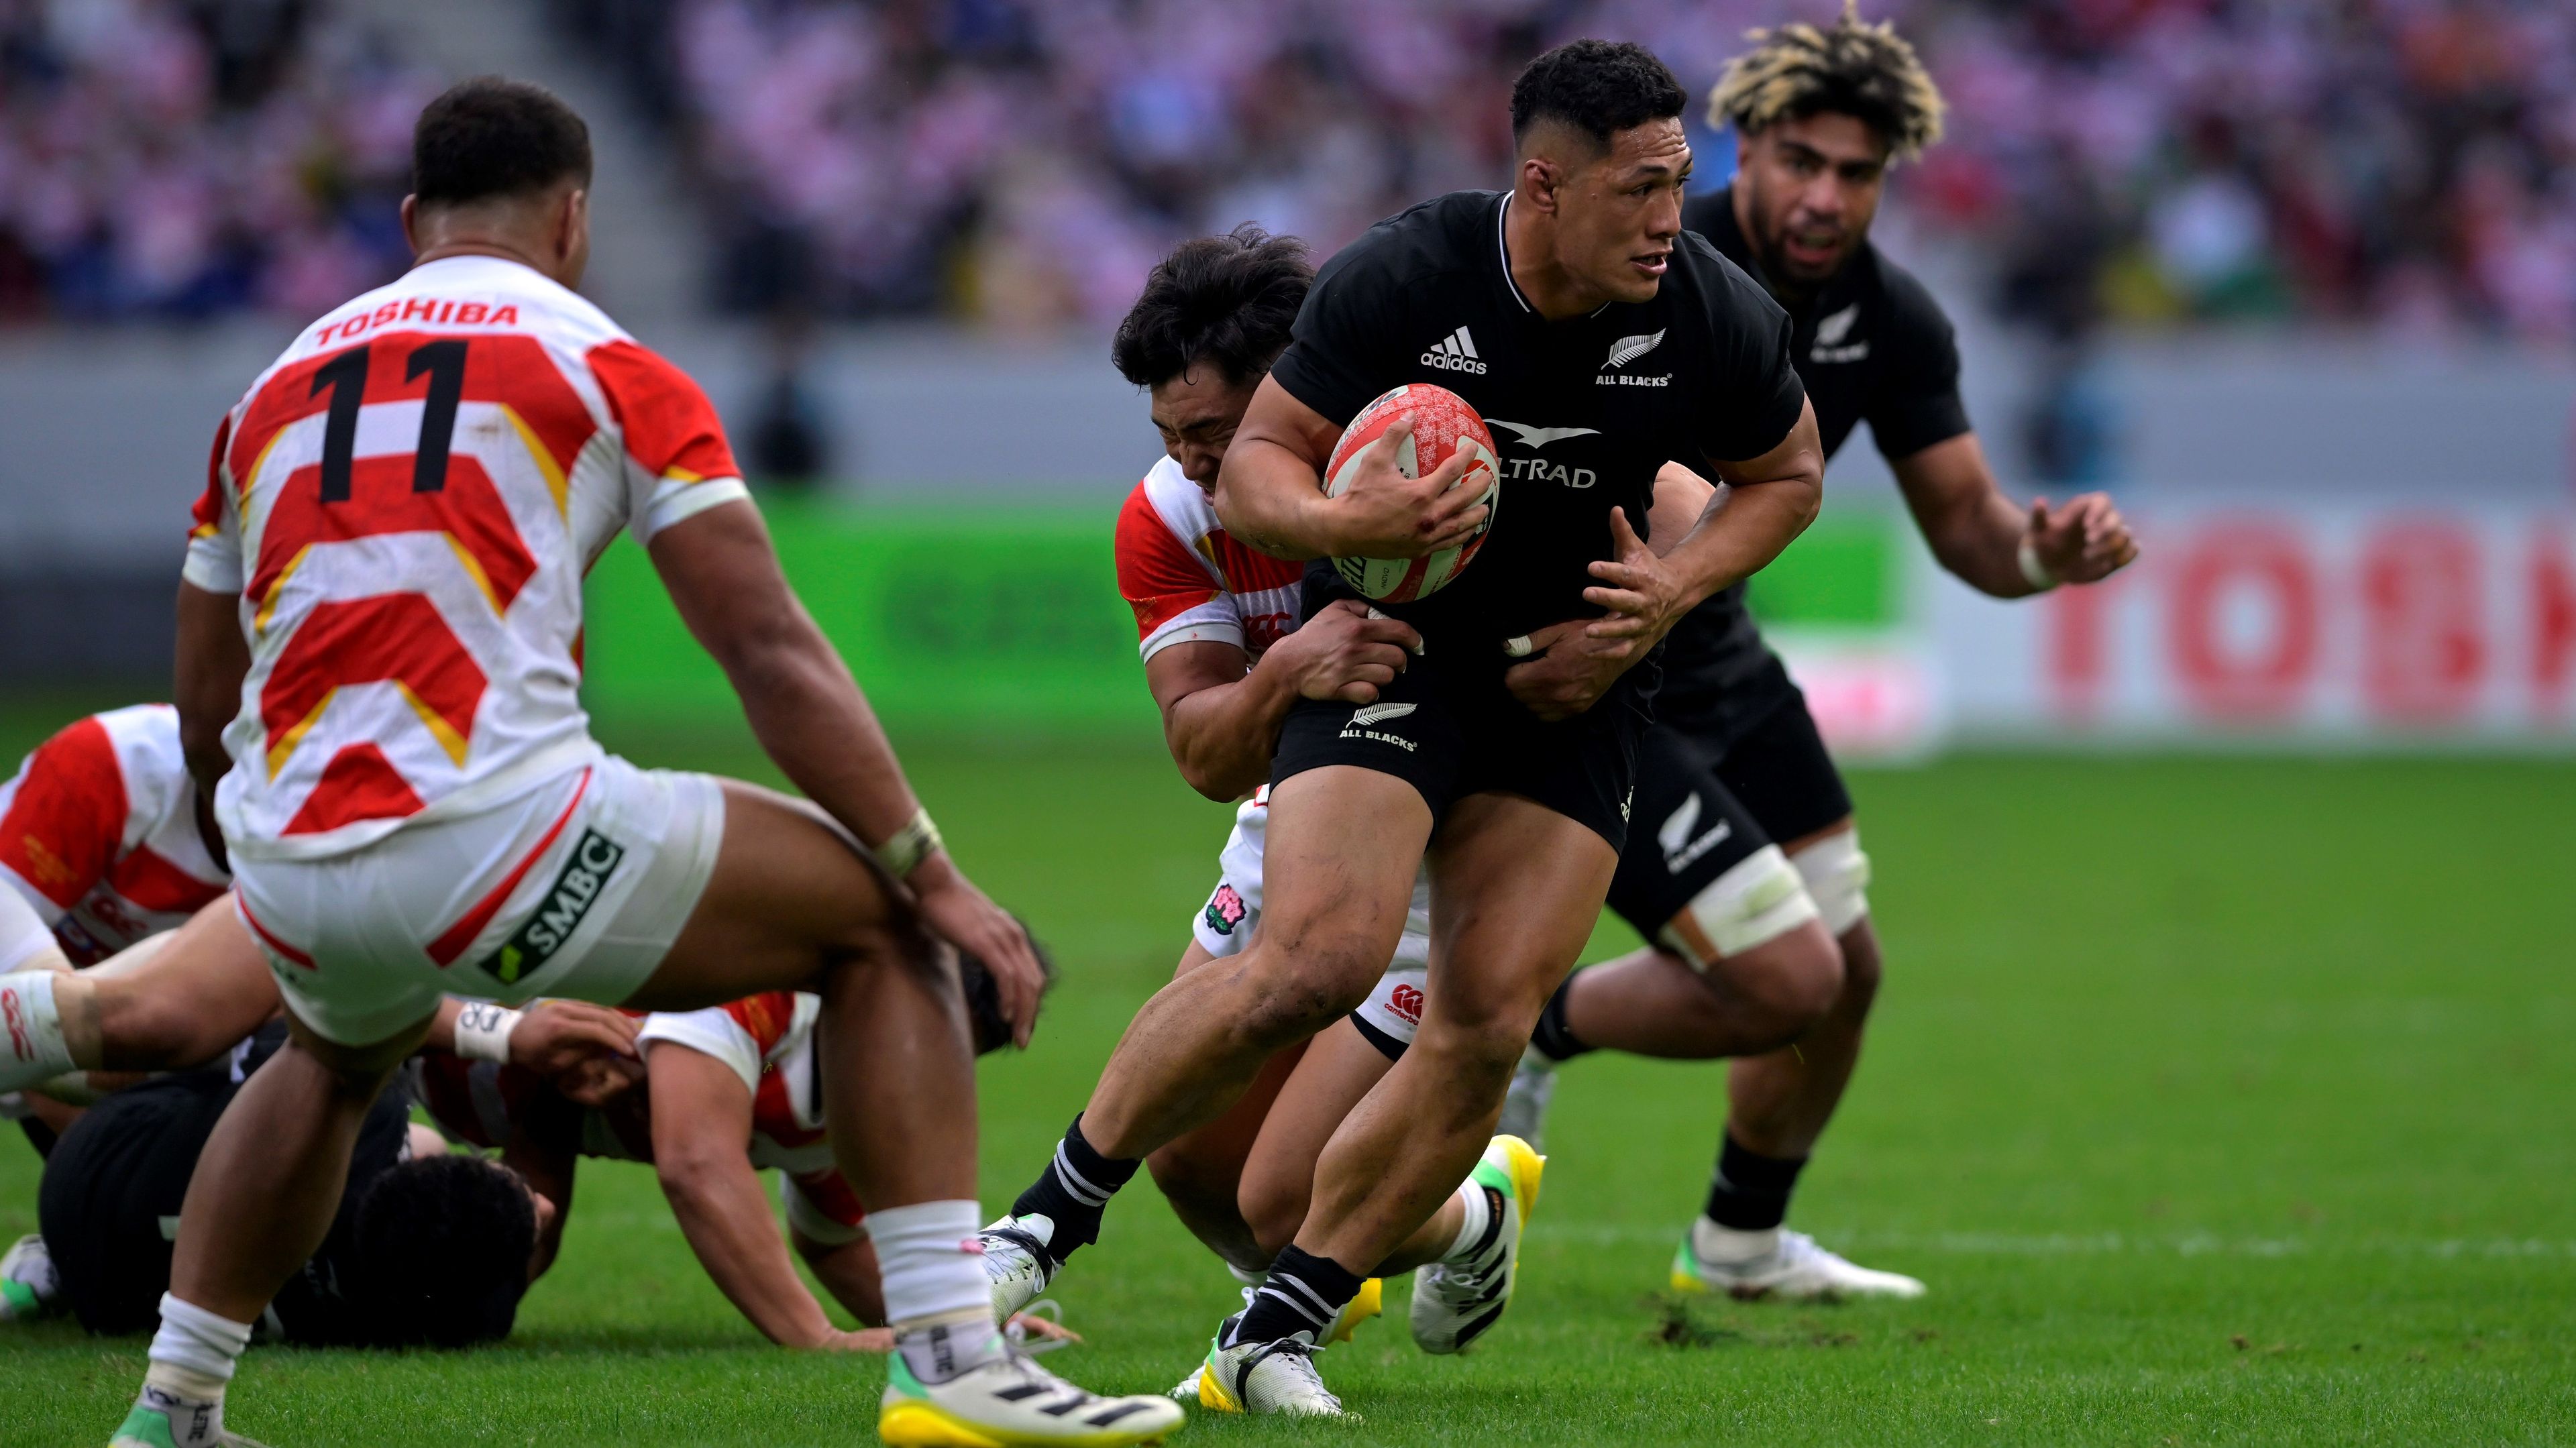 Roger Tuivasa-Sheck is tackled by Ryohei Yamanaka of Japan in their closely fought match at National Stadium in Tokyo.